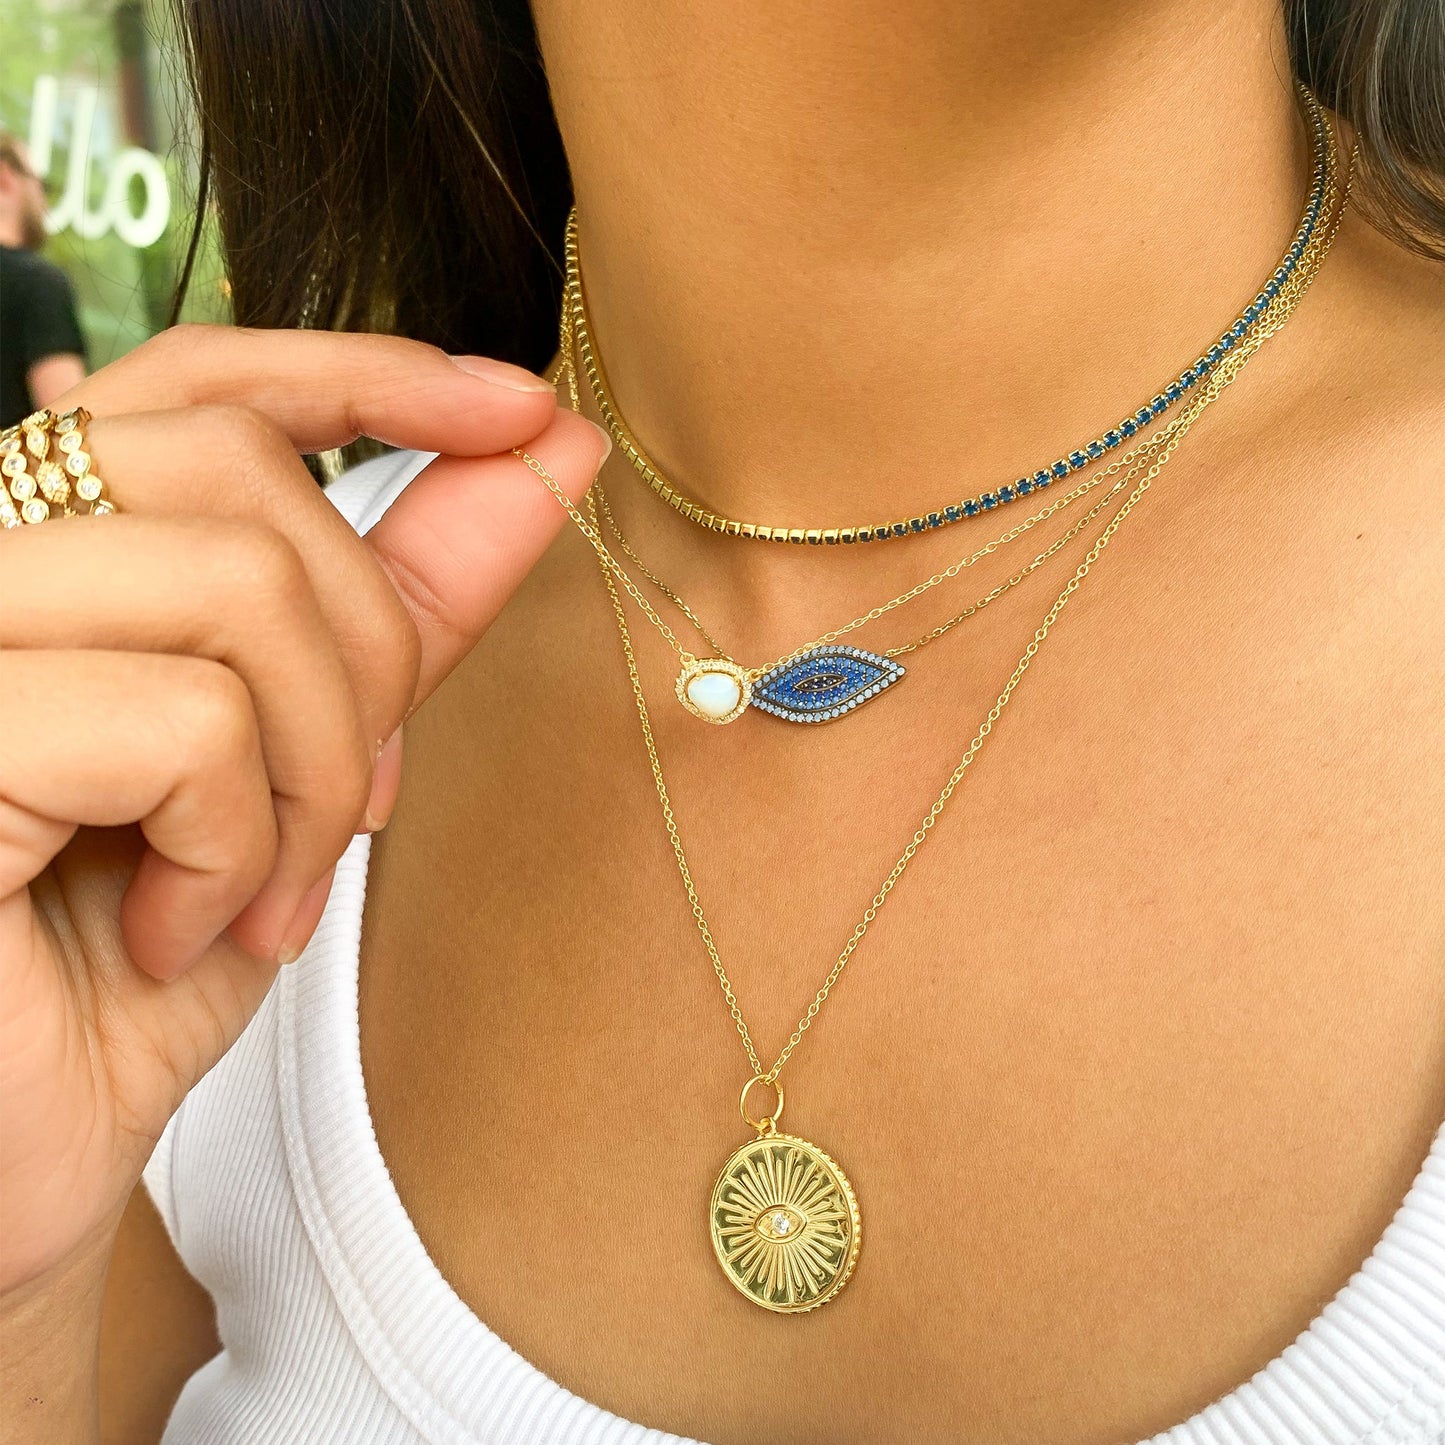 Free-Form Opal Necklace